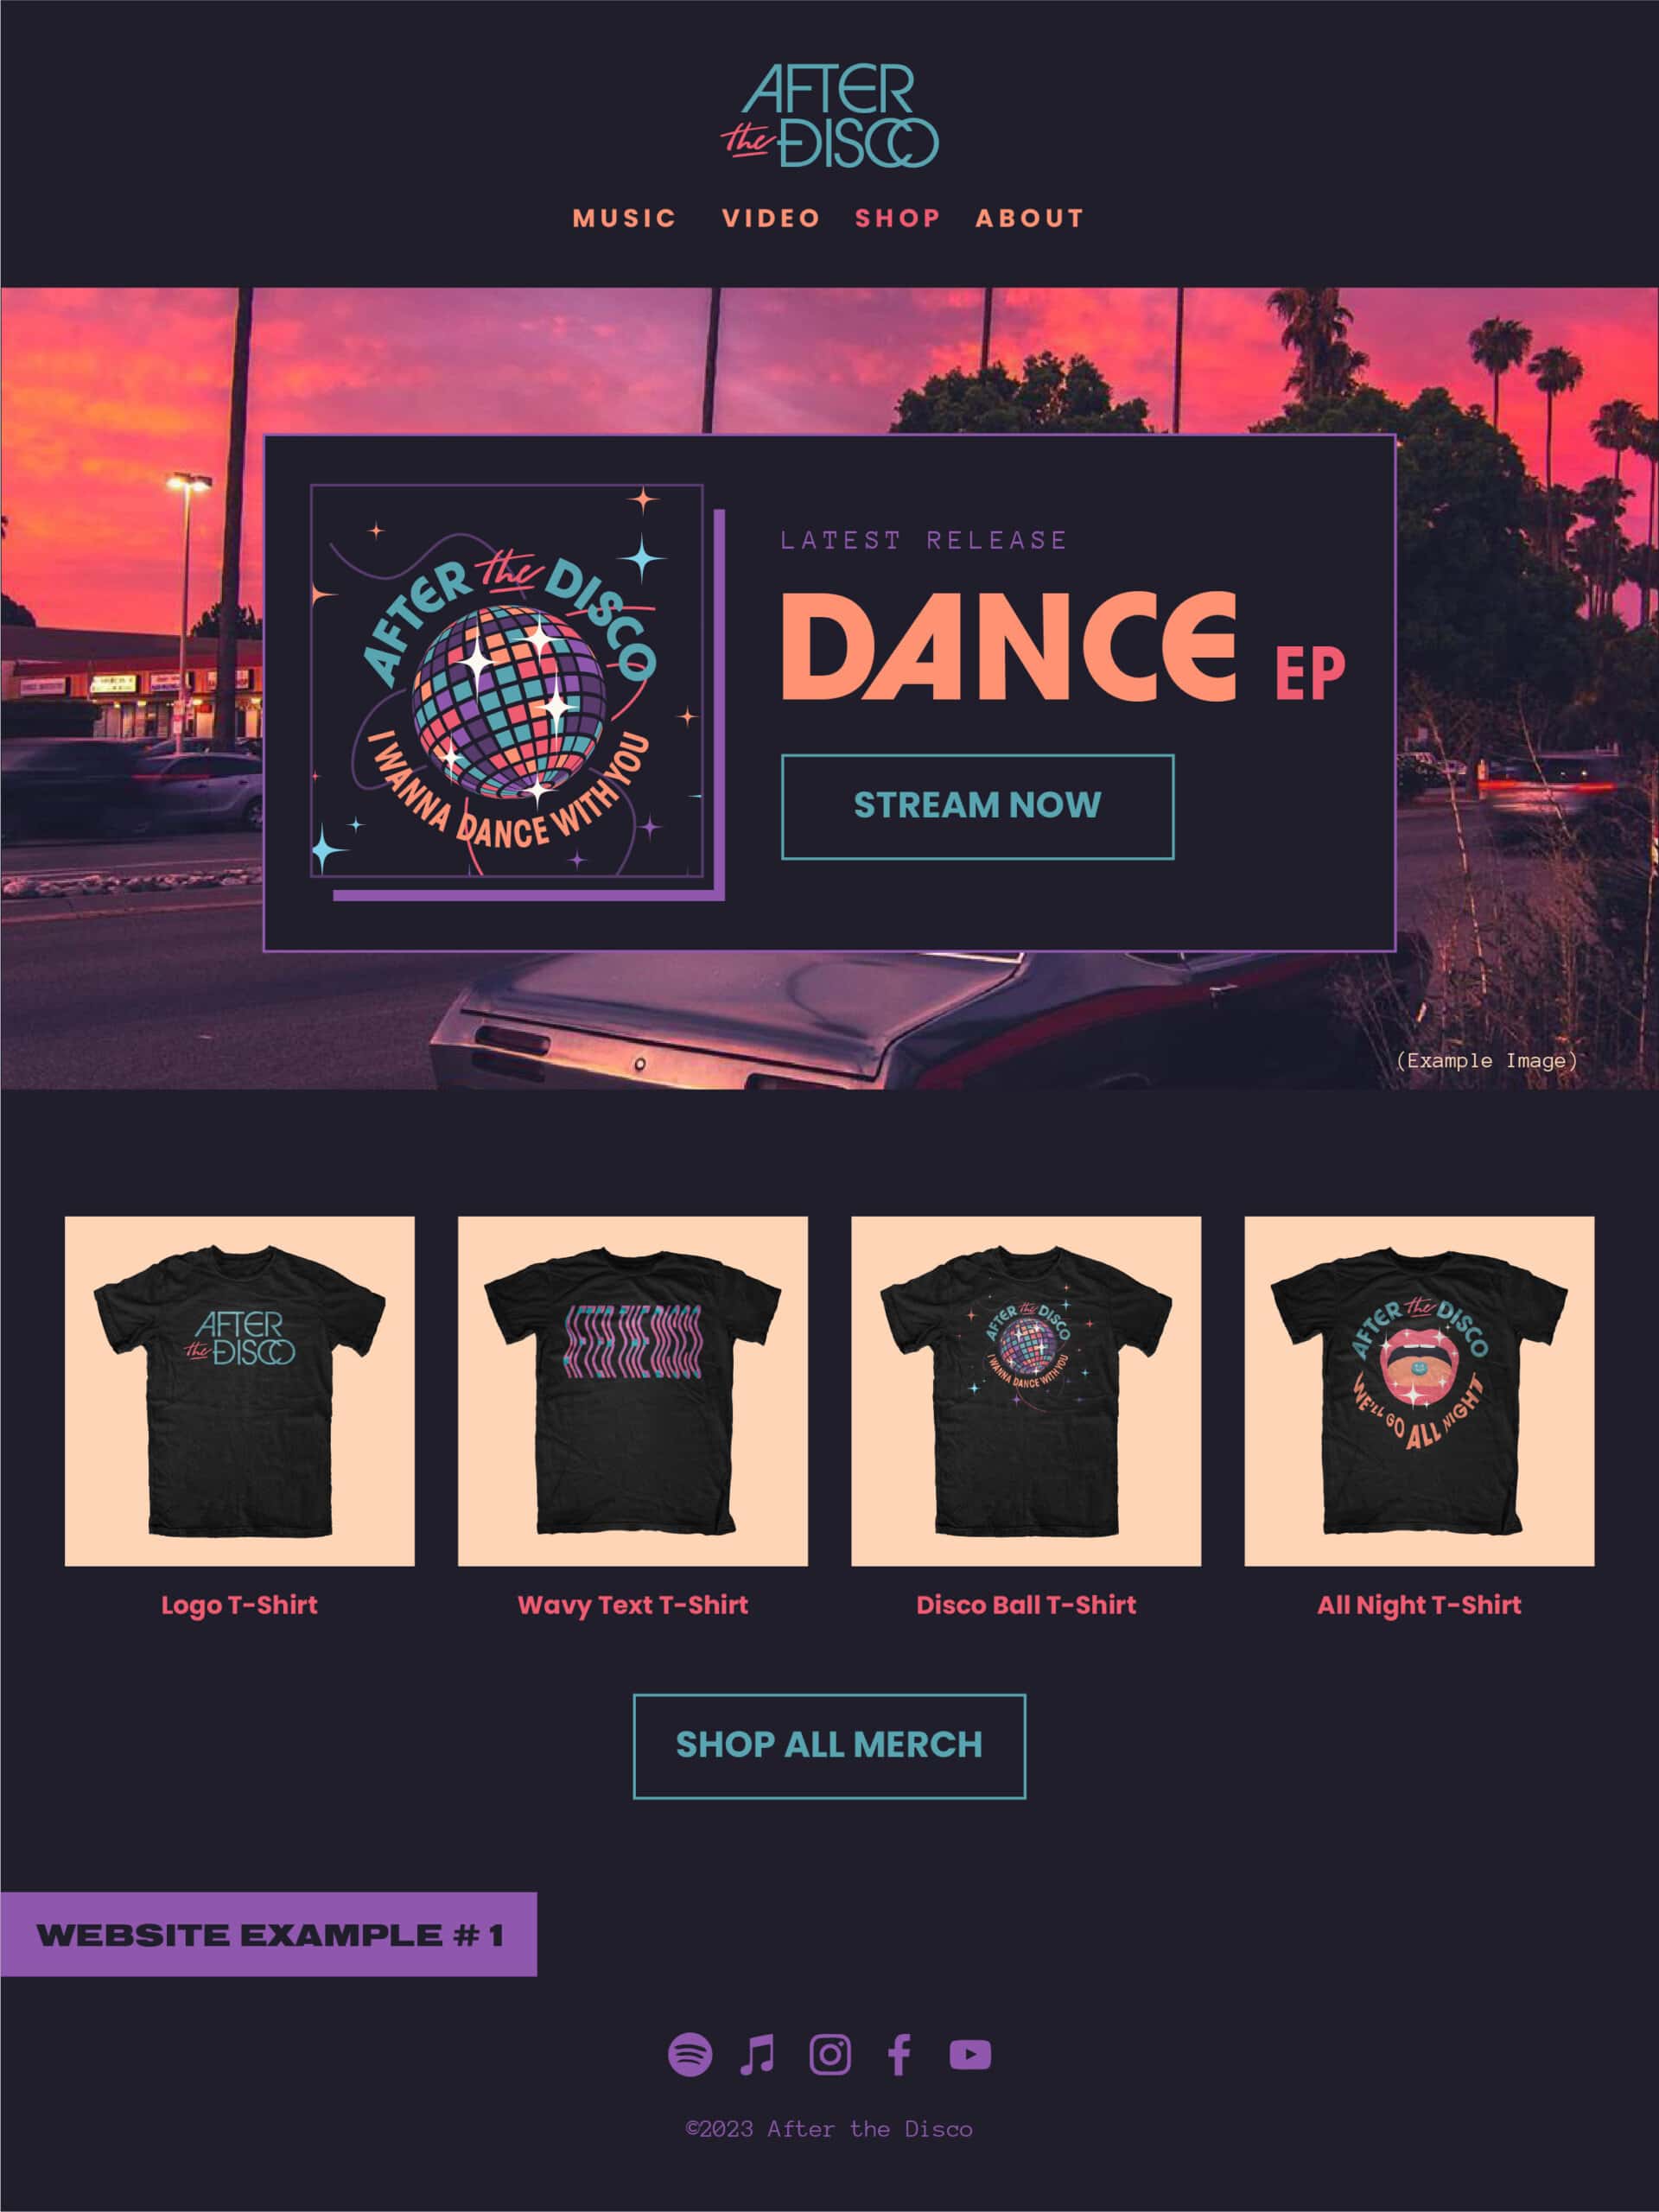 After the Disco website layout